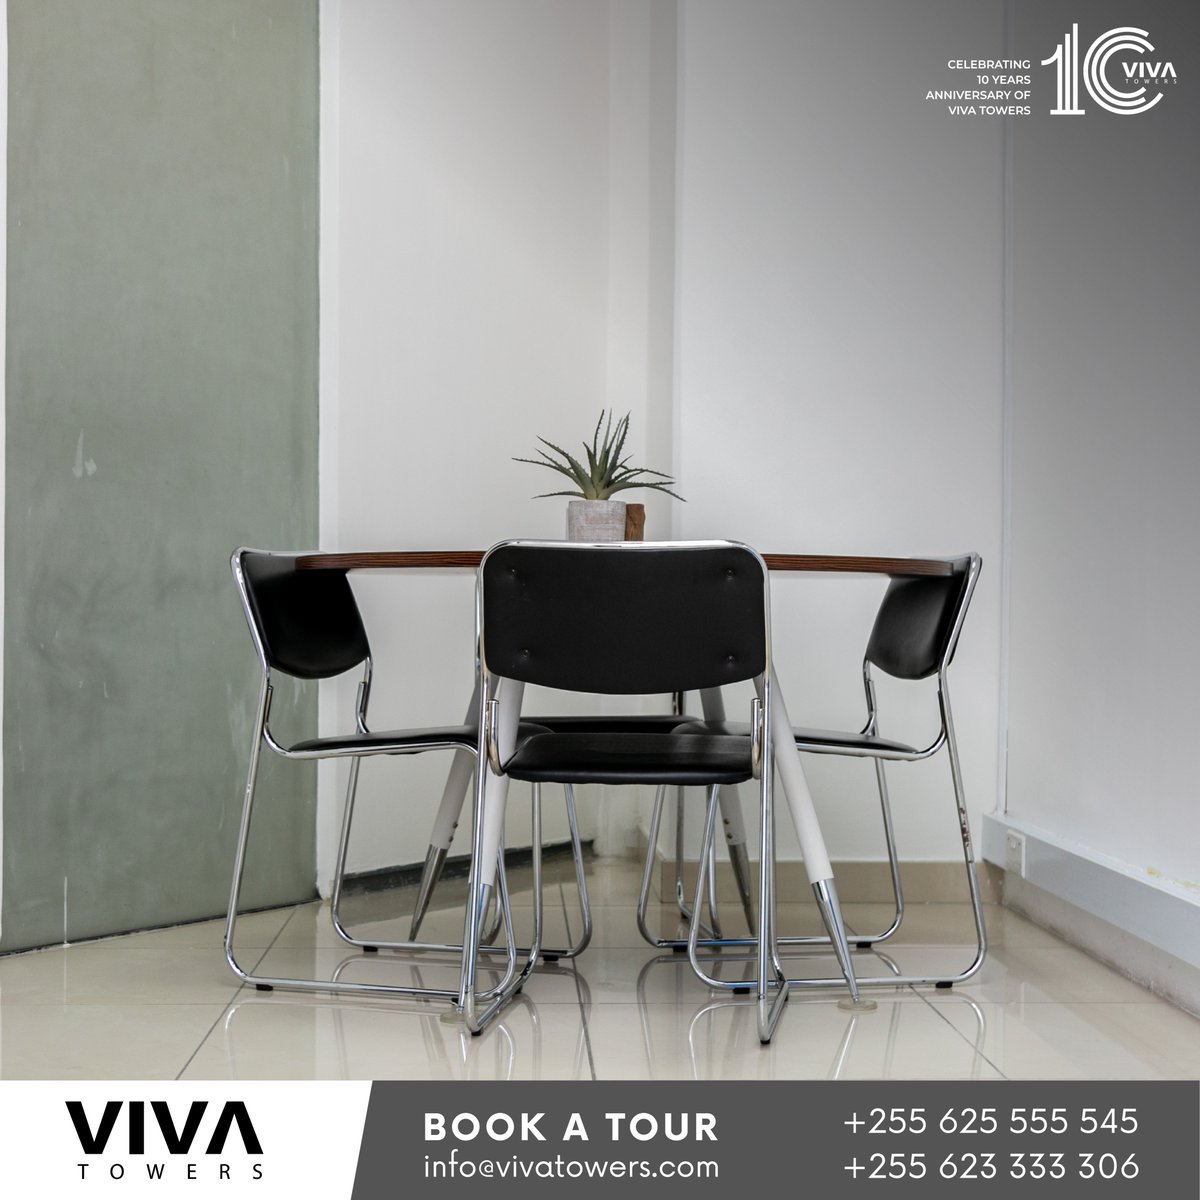 Where innovation meets inspiration - discover your new office space today! 🚀🏙️ #OfficeRental #WorkspaceGoals
#vivatowers #vivatowers10years #commercial #officespace #officespaces #building #shopspaces #daressalaam #landmark #security